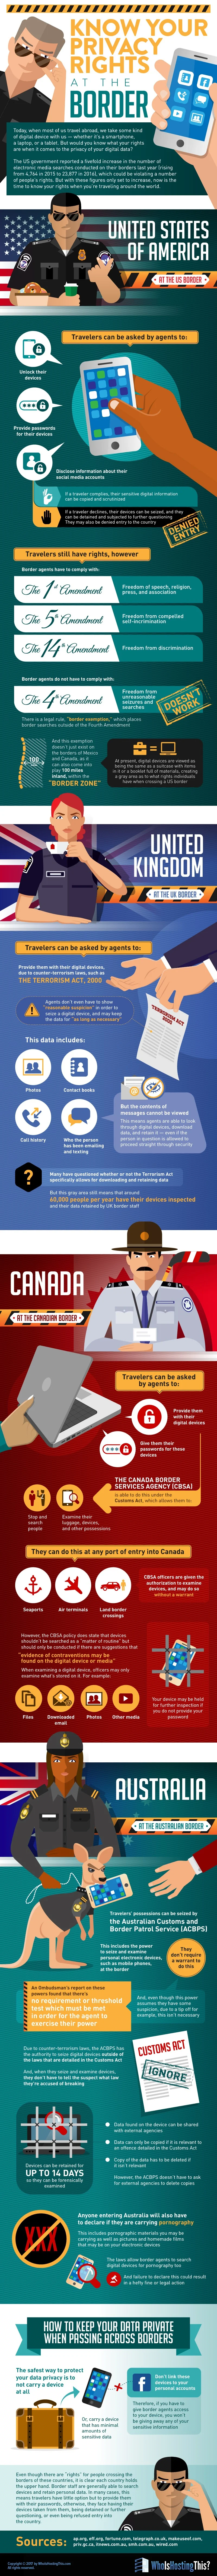 Know Your Privacy Rights at the Border [Infographic]